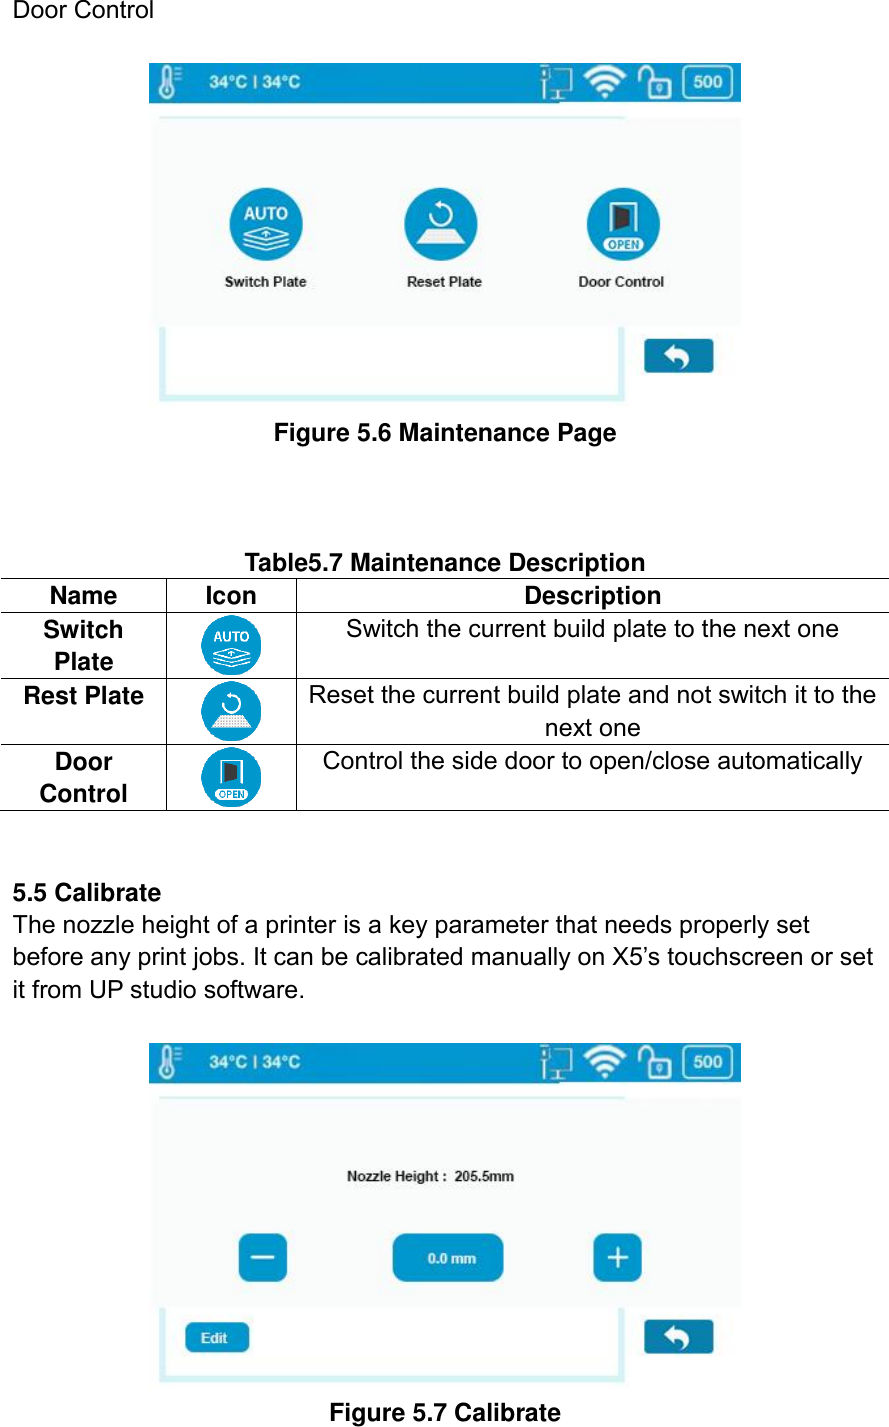 Door Control   Figure 5.6 Maintenance Page    Table5.7 Maintenance Description Name Icon Description Switch Plate  Switch the current build plate to the next one   Rest Plate  Reset the current build plate and not switch it to the next one Door Control  Control the side door to open/close automatically   5.5 Calibrate   The nozzle height of a printer is a key parameter that needs properly set before any print jobs. It can be calibrated manually on X5’s touchscreen or set it from UP studio software.   Figure 5.7 Calibrate 